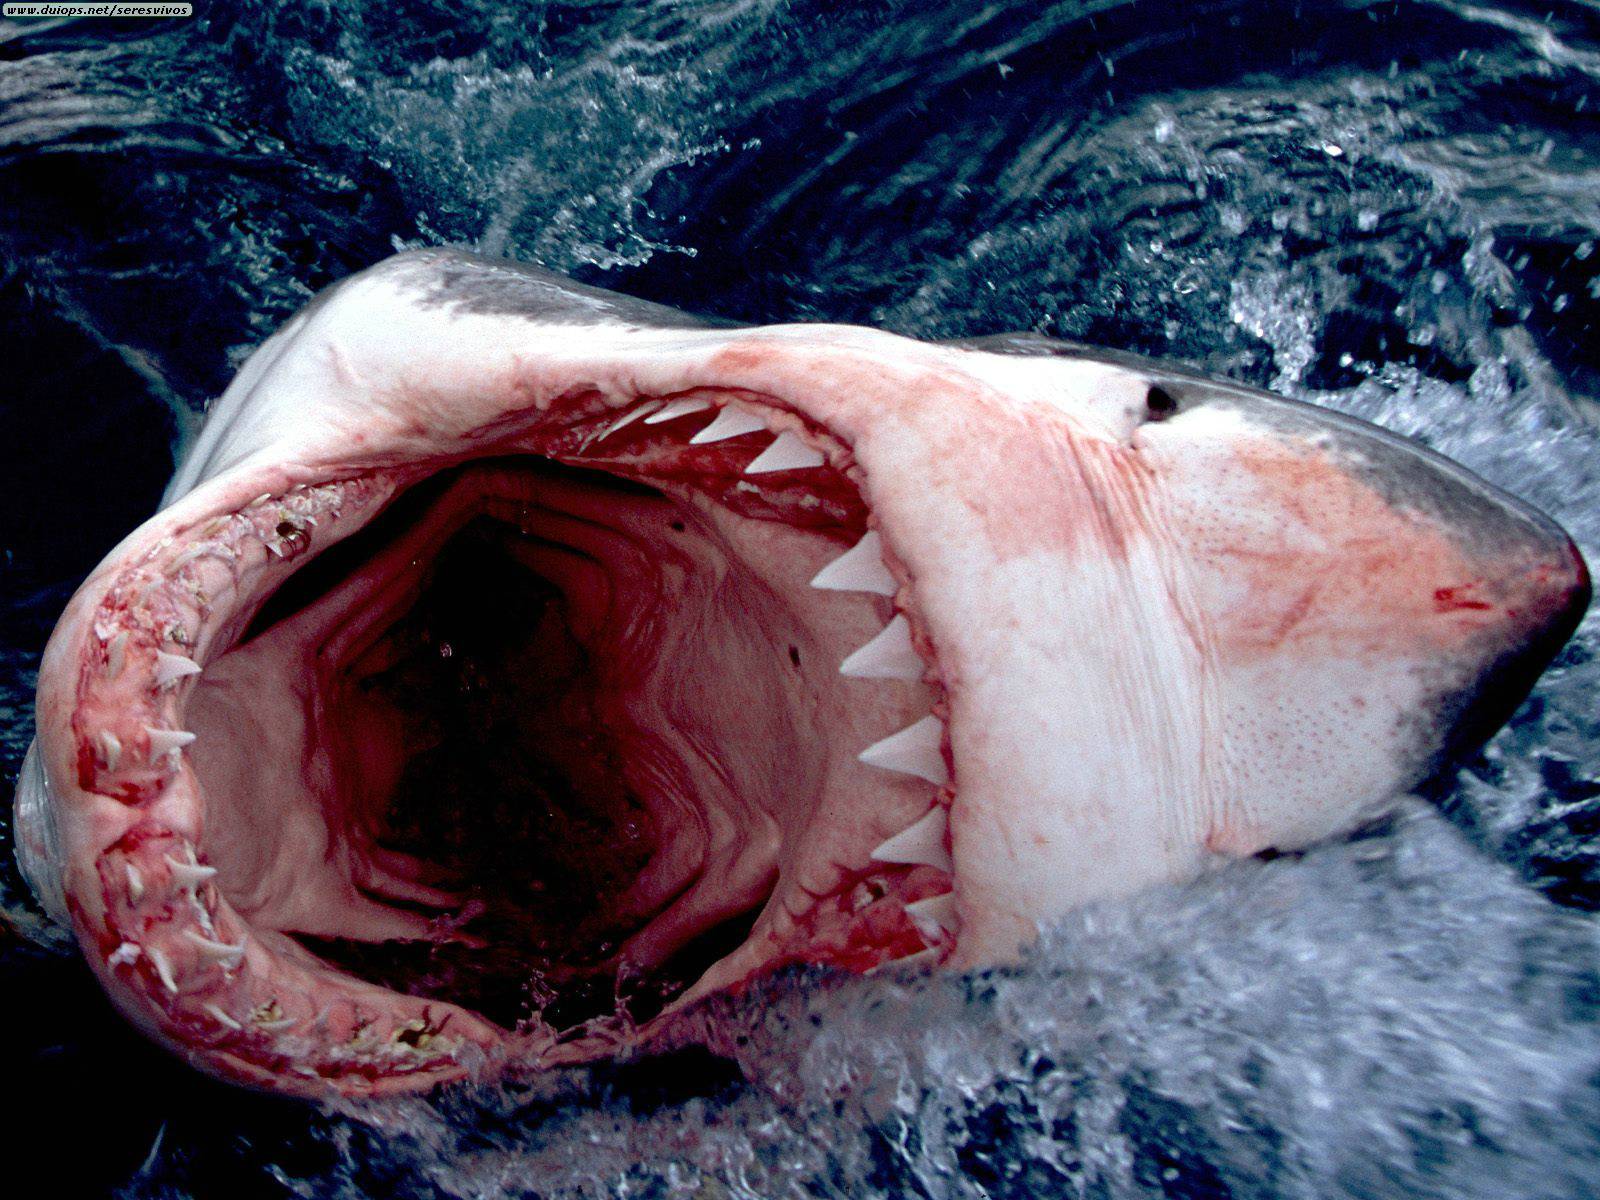 HD HQ wallpapers: Beautiful White Shark Mouth Hd Wallpapers/Image 2013